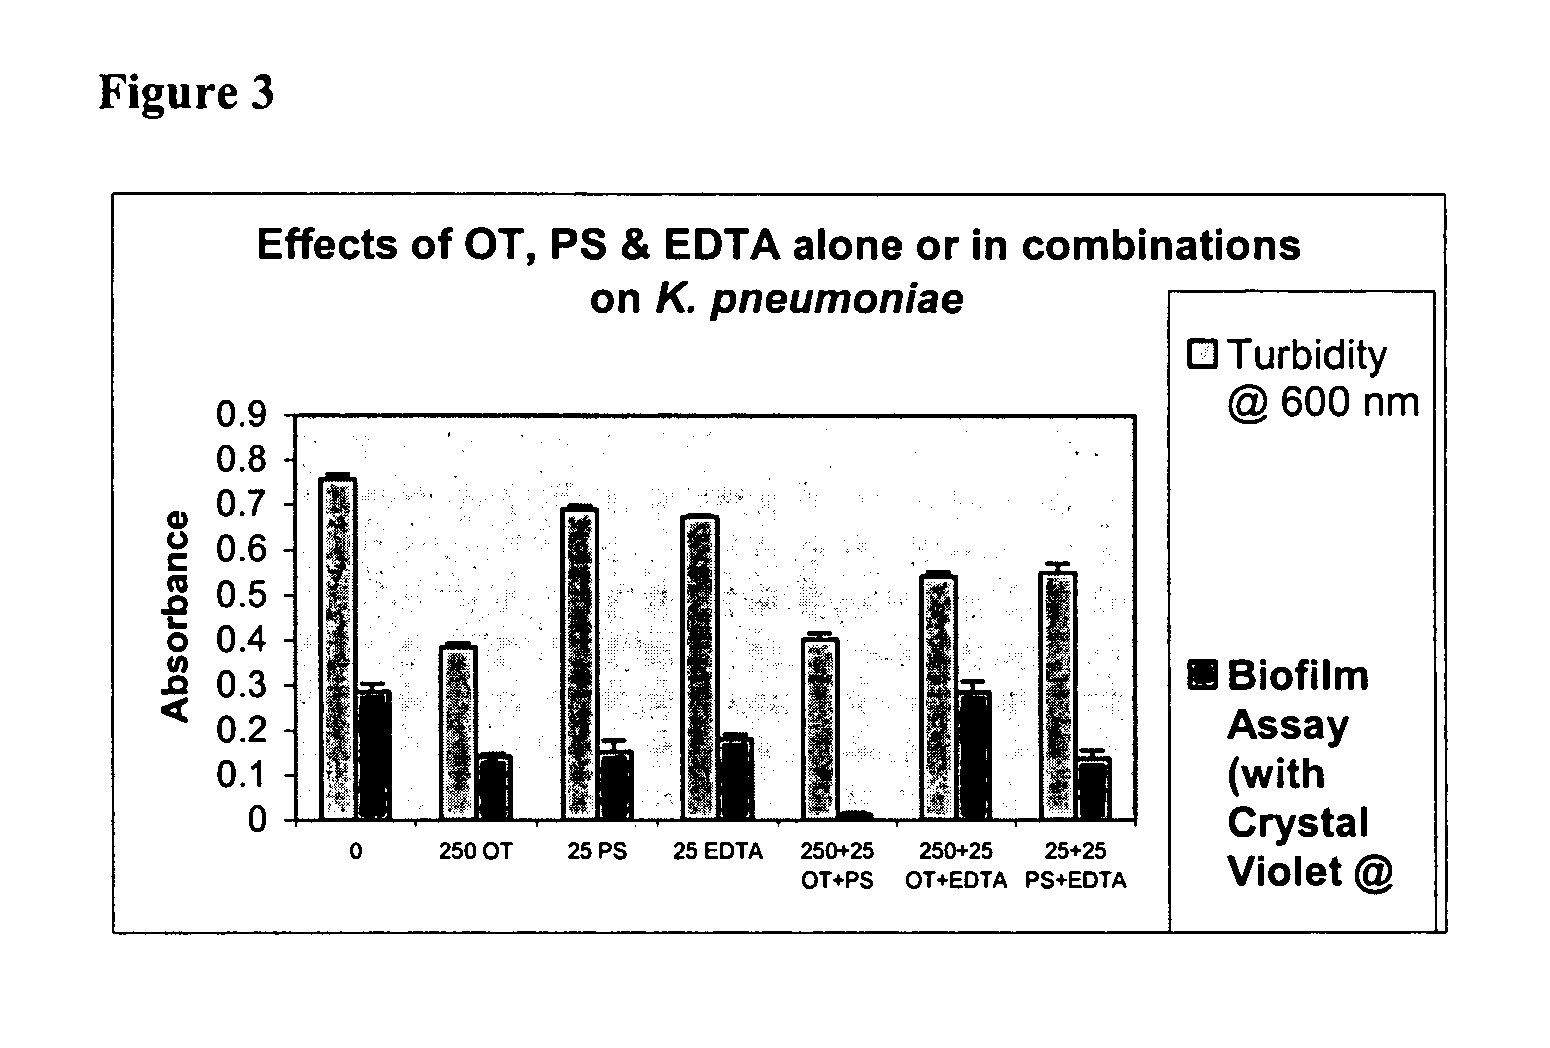 Synergistic antimicrobial compositions and methods of inhibiting biofilm formation